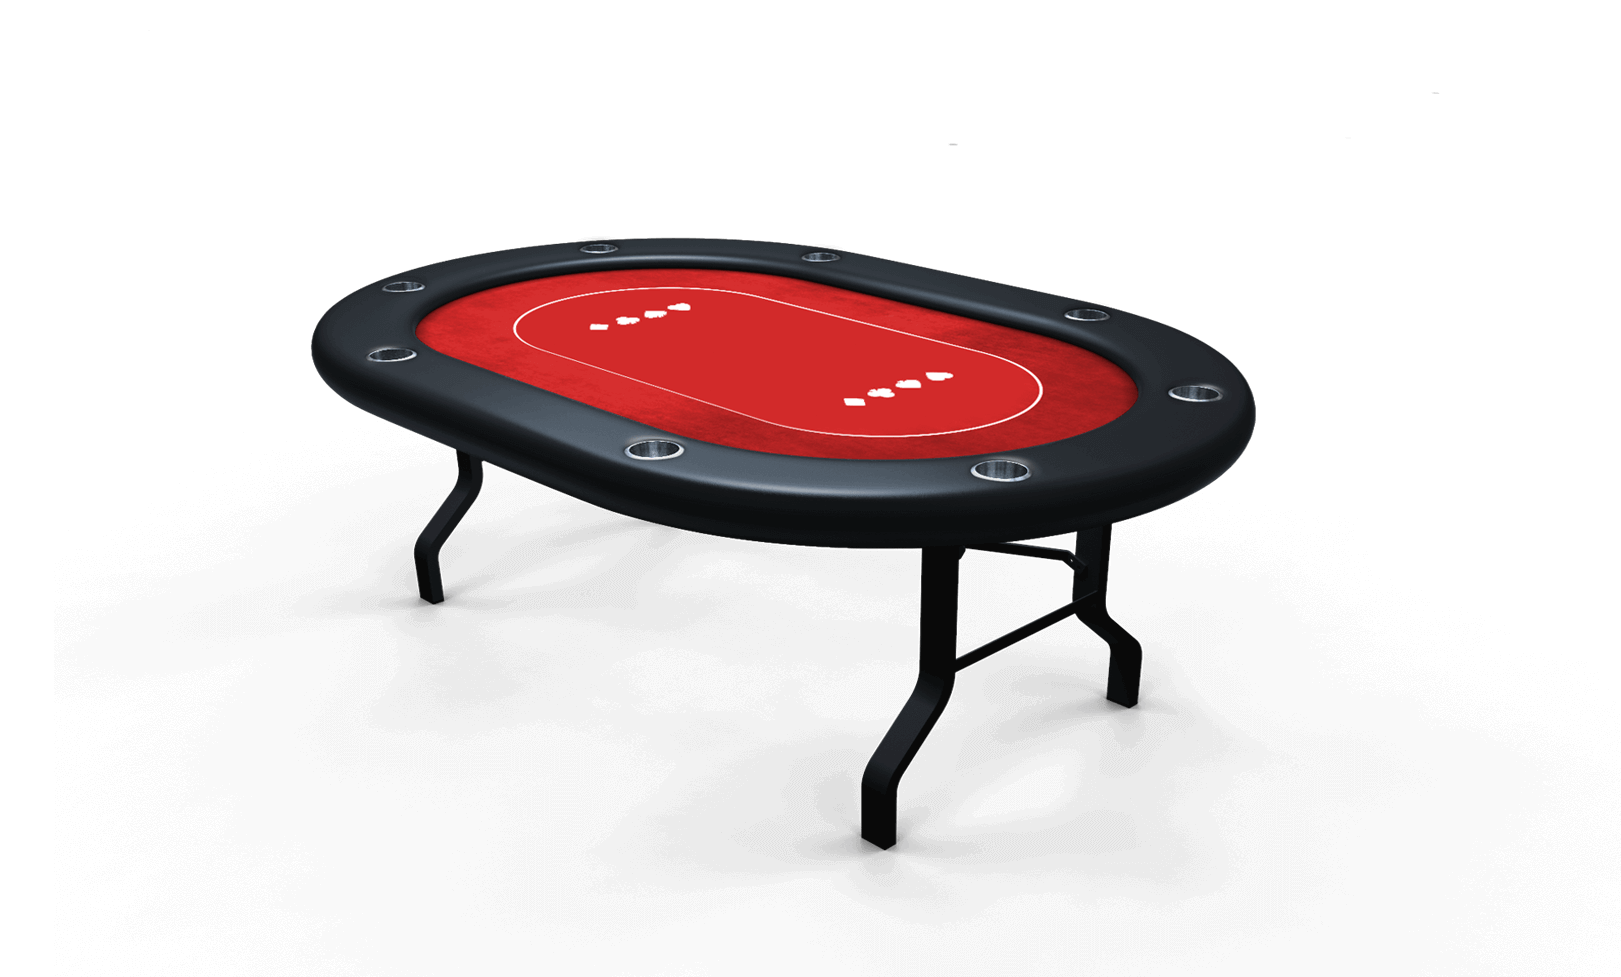 Oval-shaped poker table with eight cupholders in the black vinyl foam rail, red felt with a pattern, a dealer box, and metal legs.